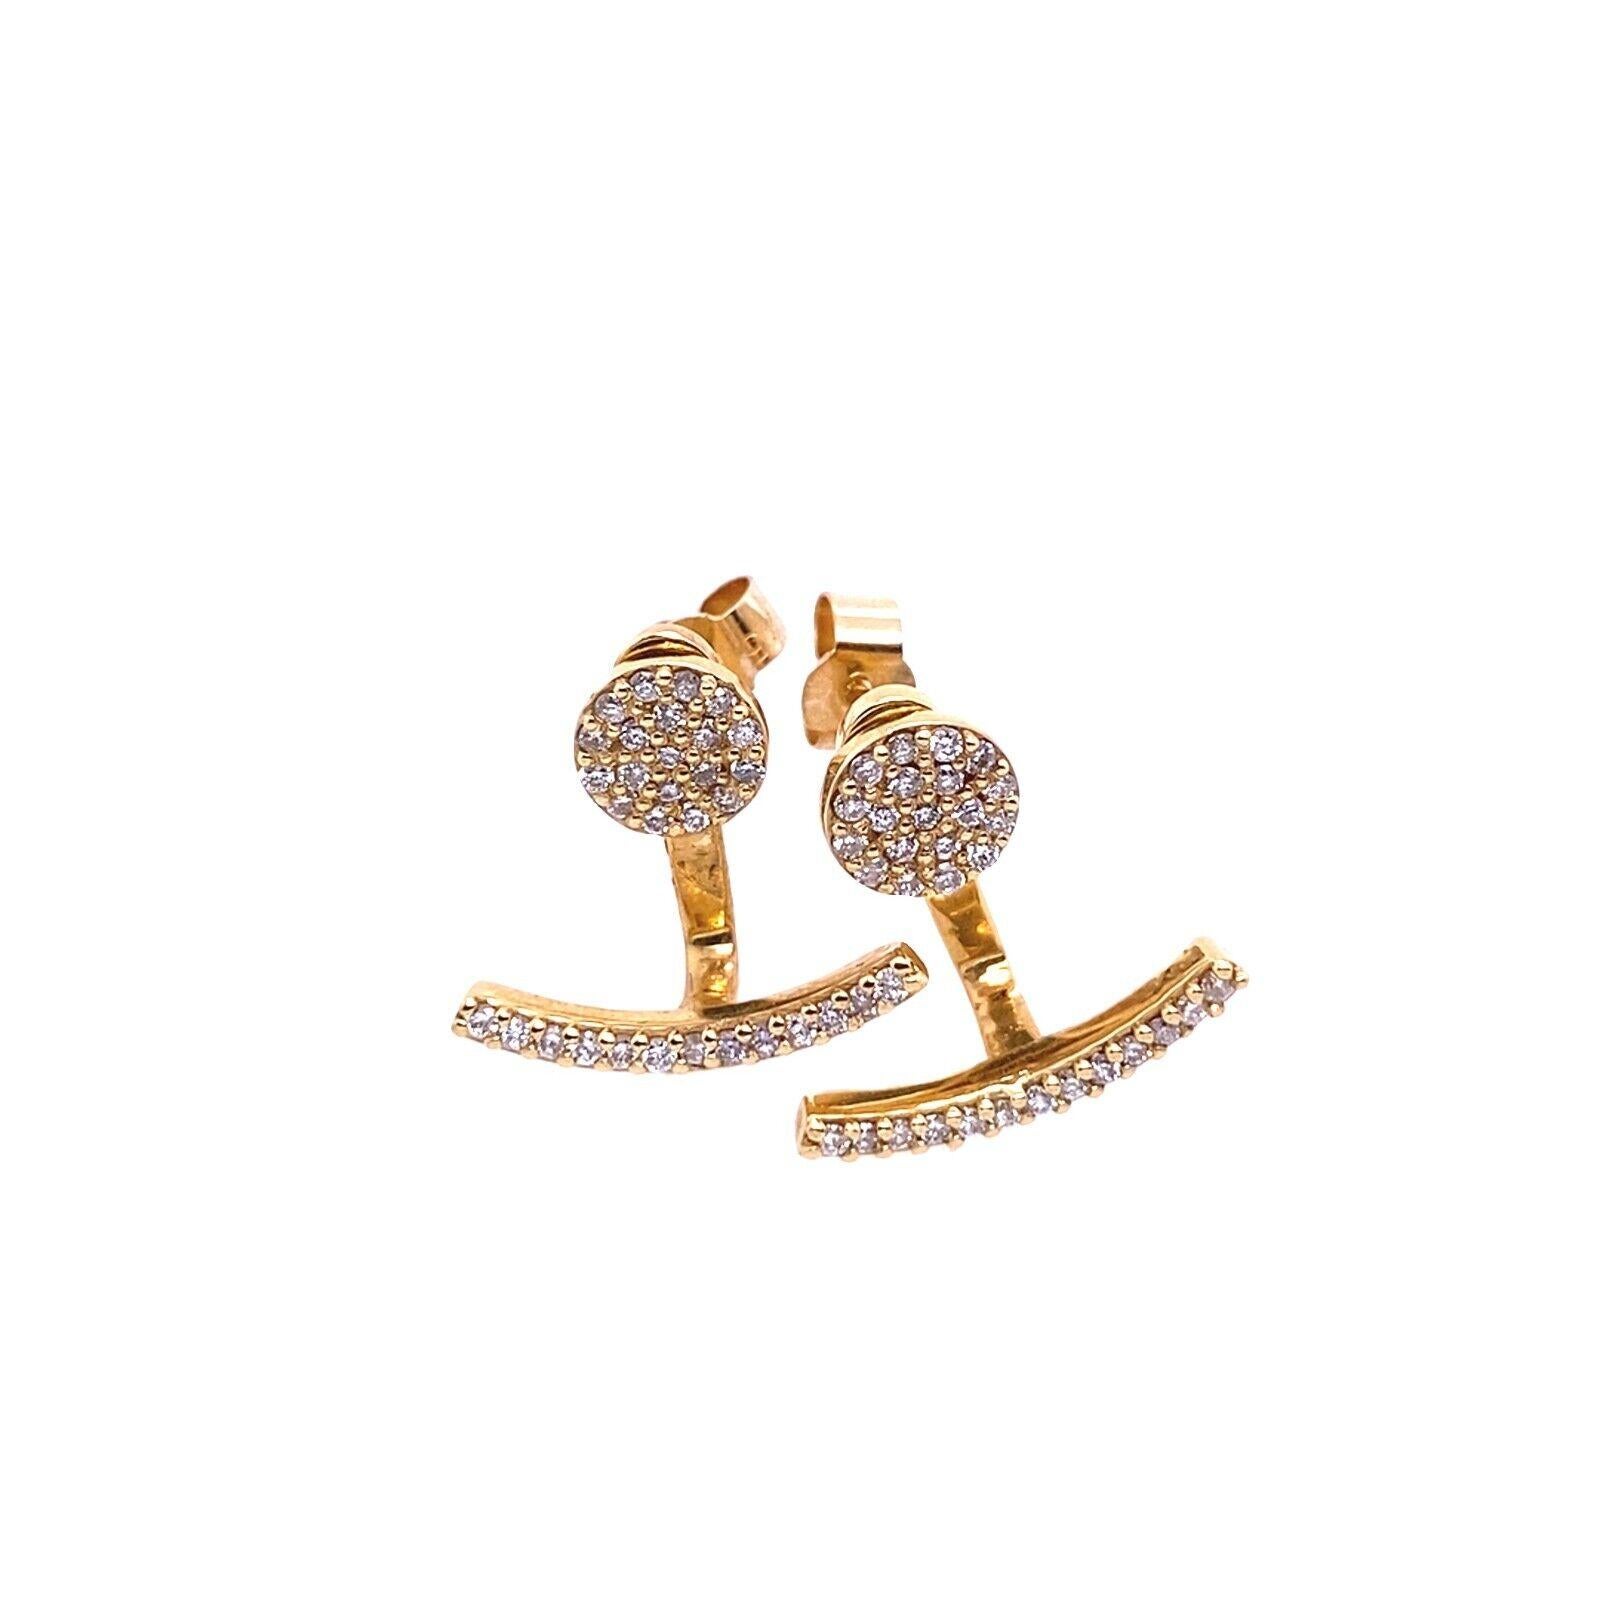 Round Cut Fine Quality Drops & Studs Earrings Set with Diamonds in 18ct Yellow Gold For Sale